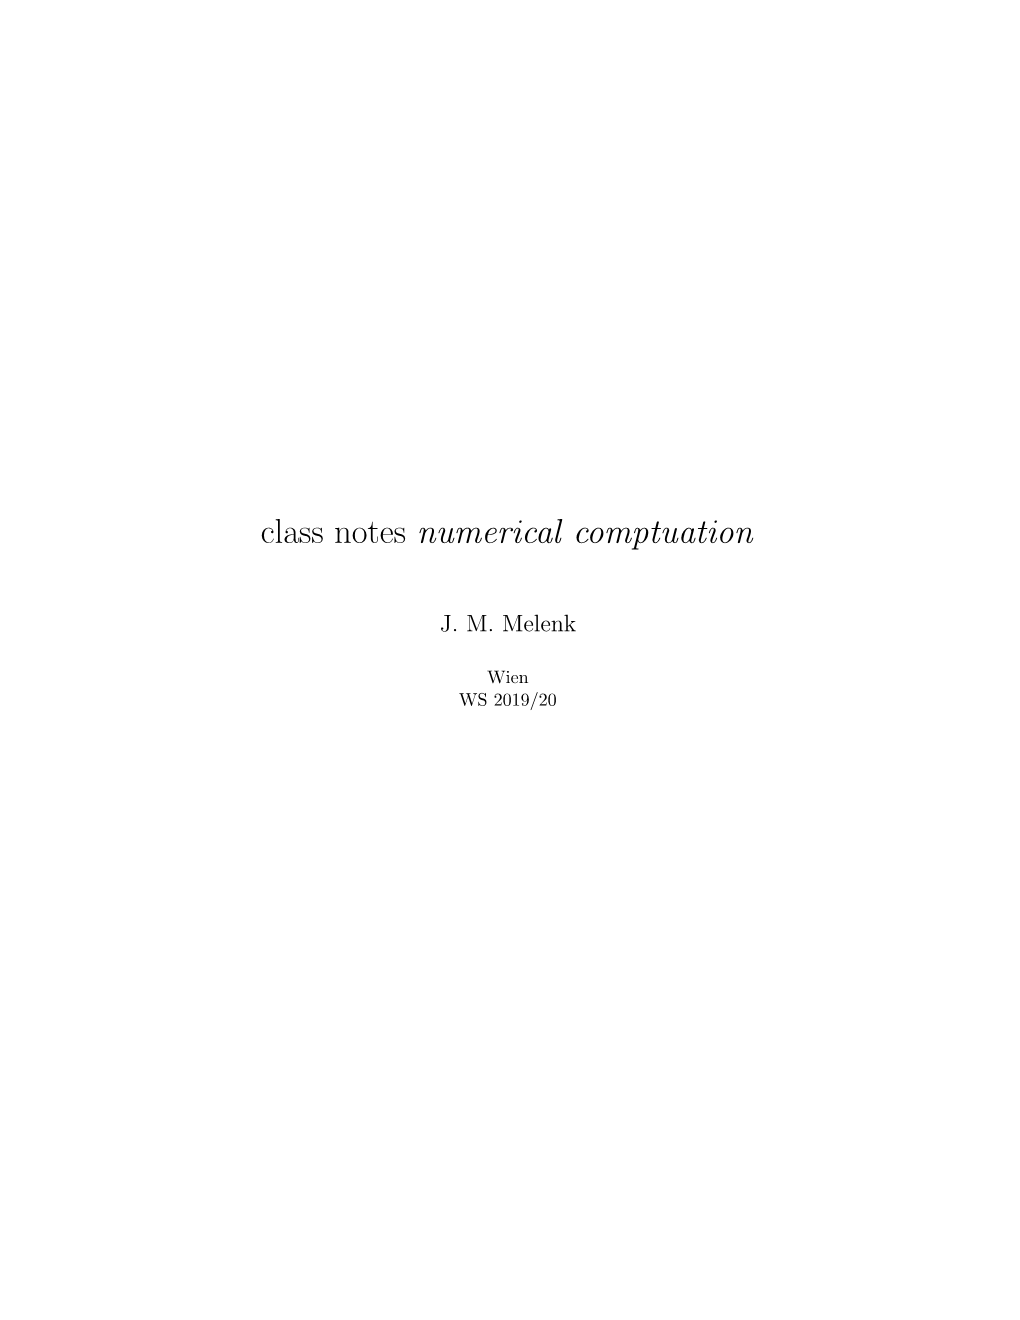 Class Notes Numerical Comptuation